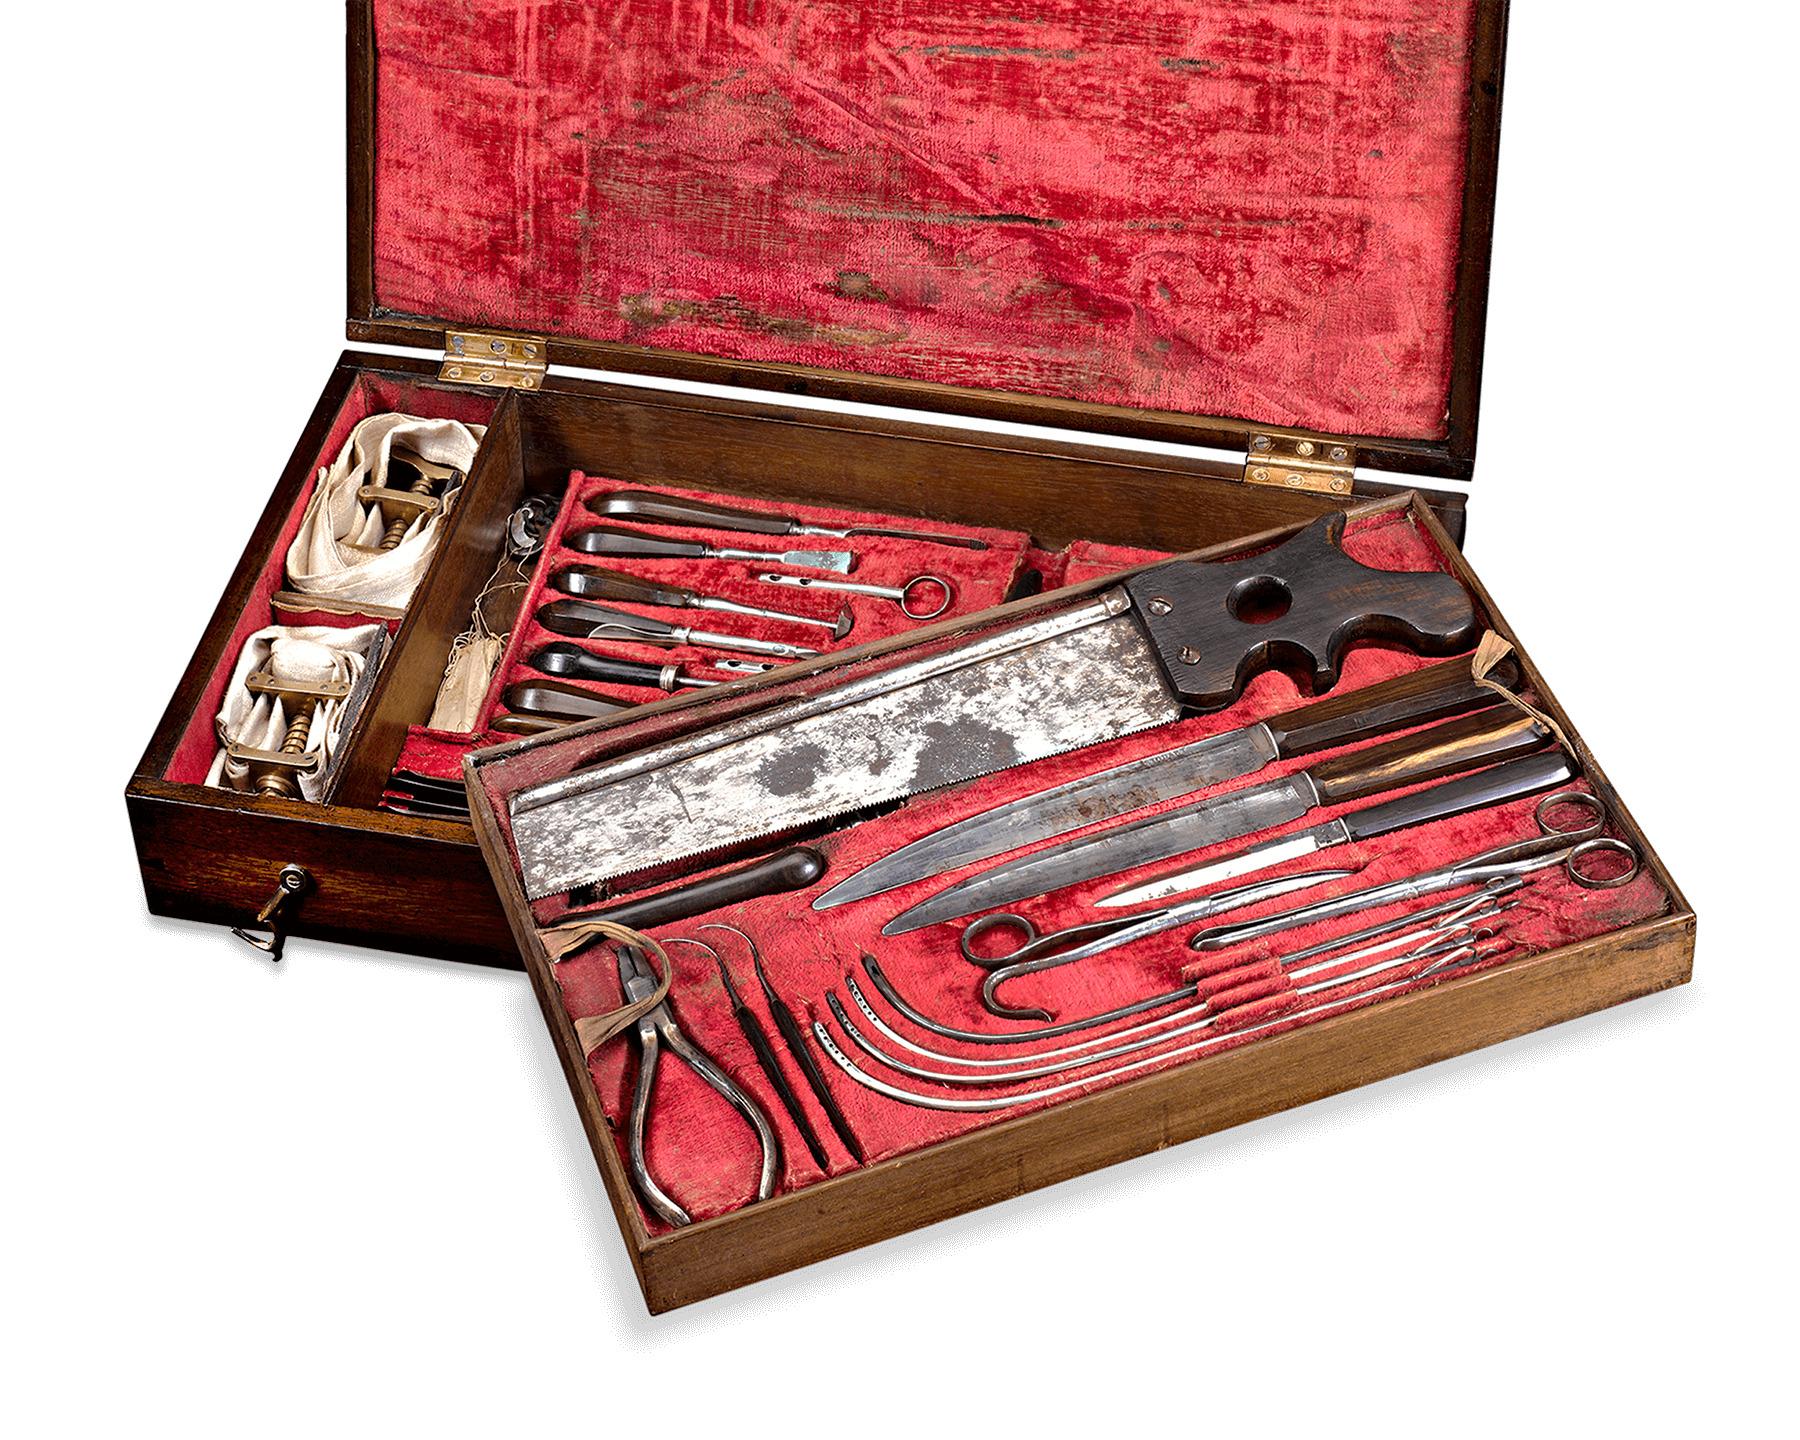 This exceptionally rare English surgeon's kit by Stodart of London was once used by a surgeon to perform amputations. Held in its original fitted case, the assemblage of ebony-handled instruments includes a large amputation saw, metacarpal saw,